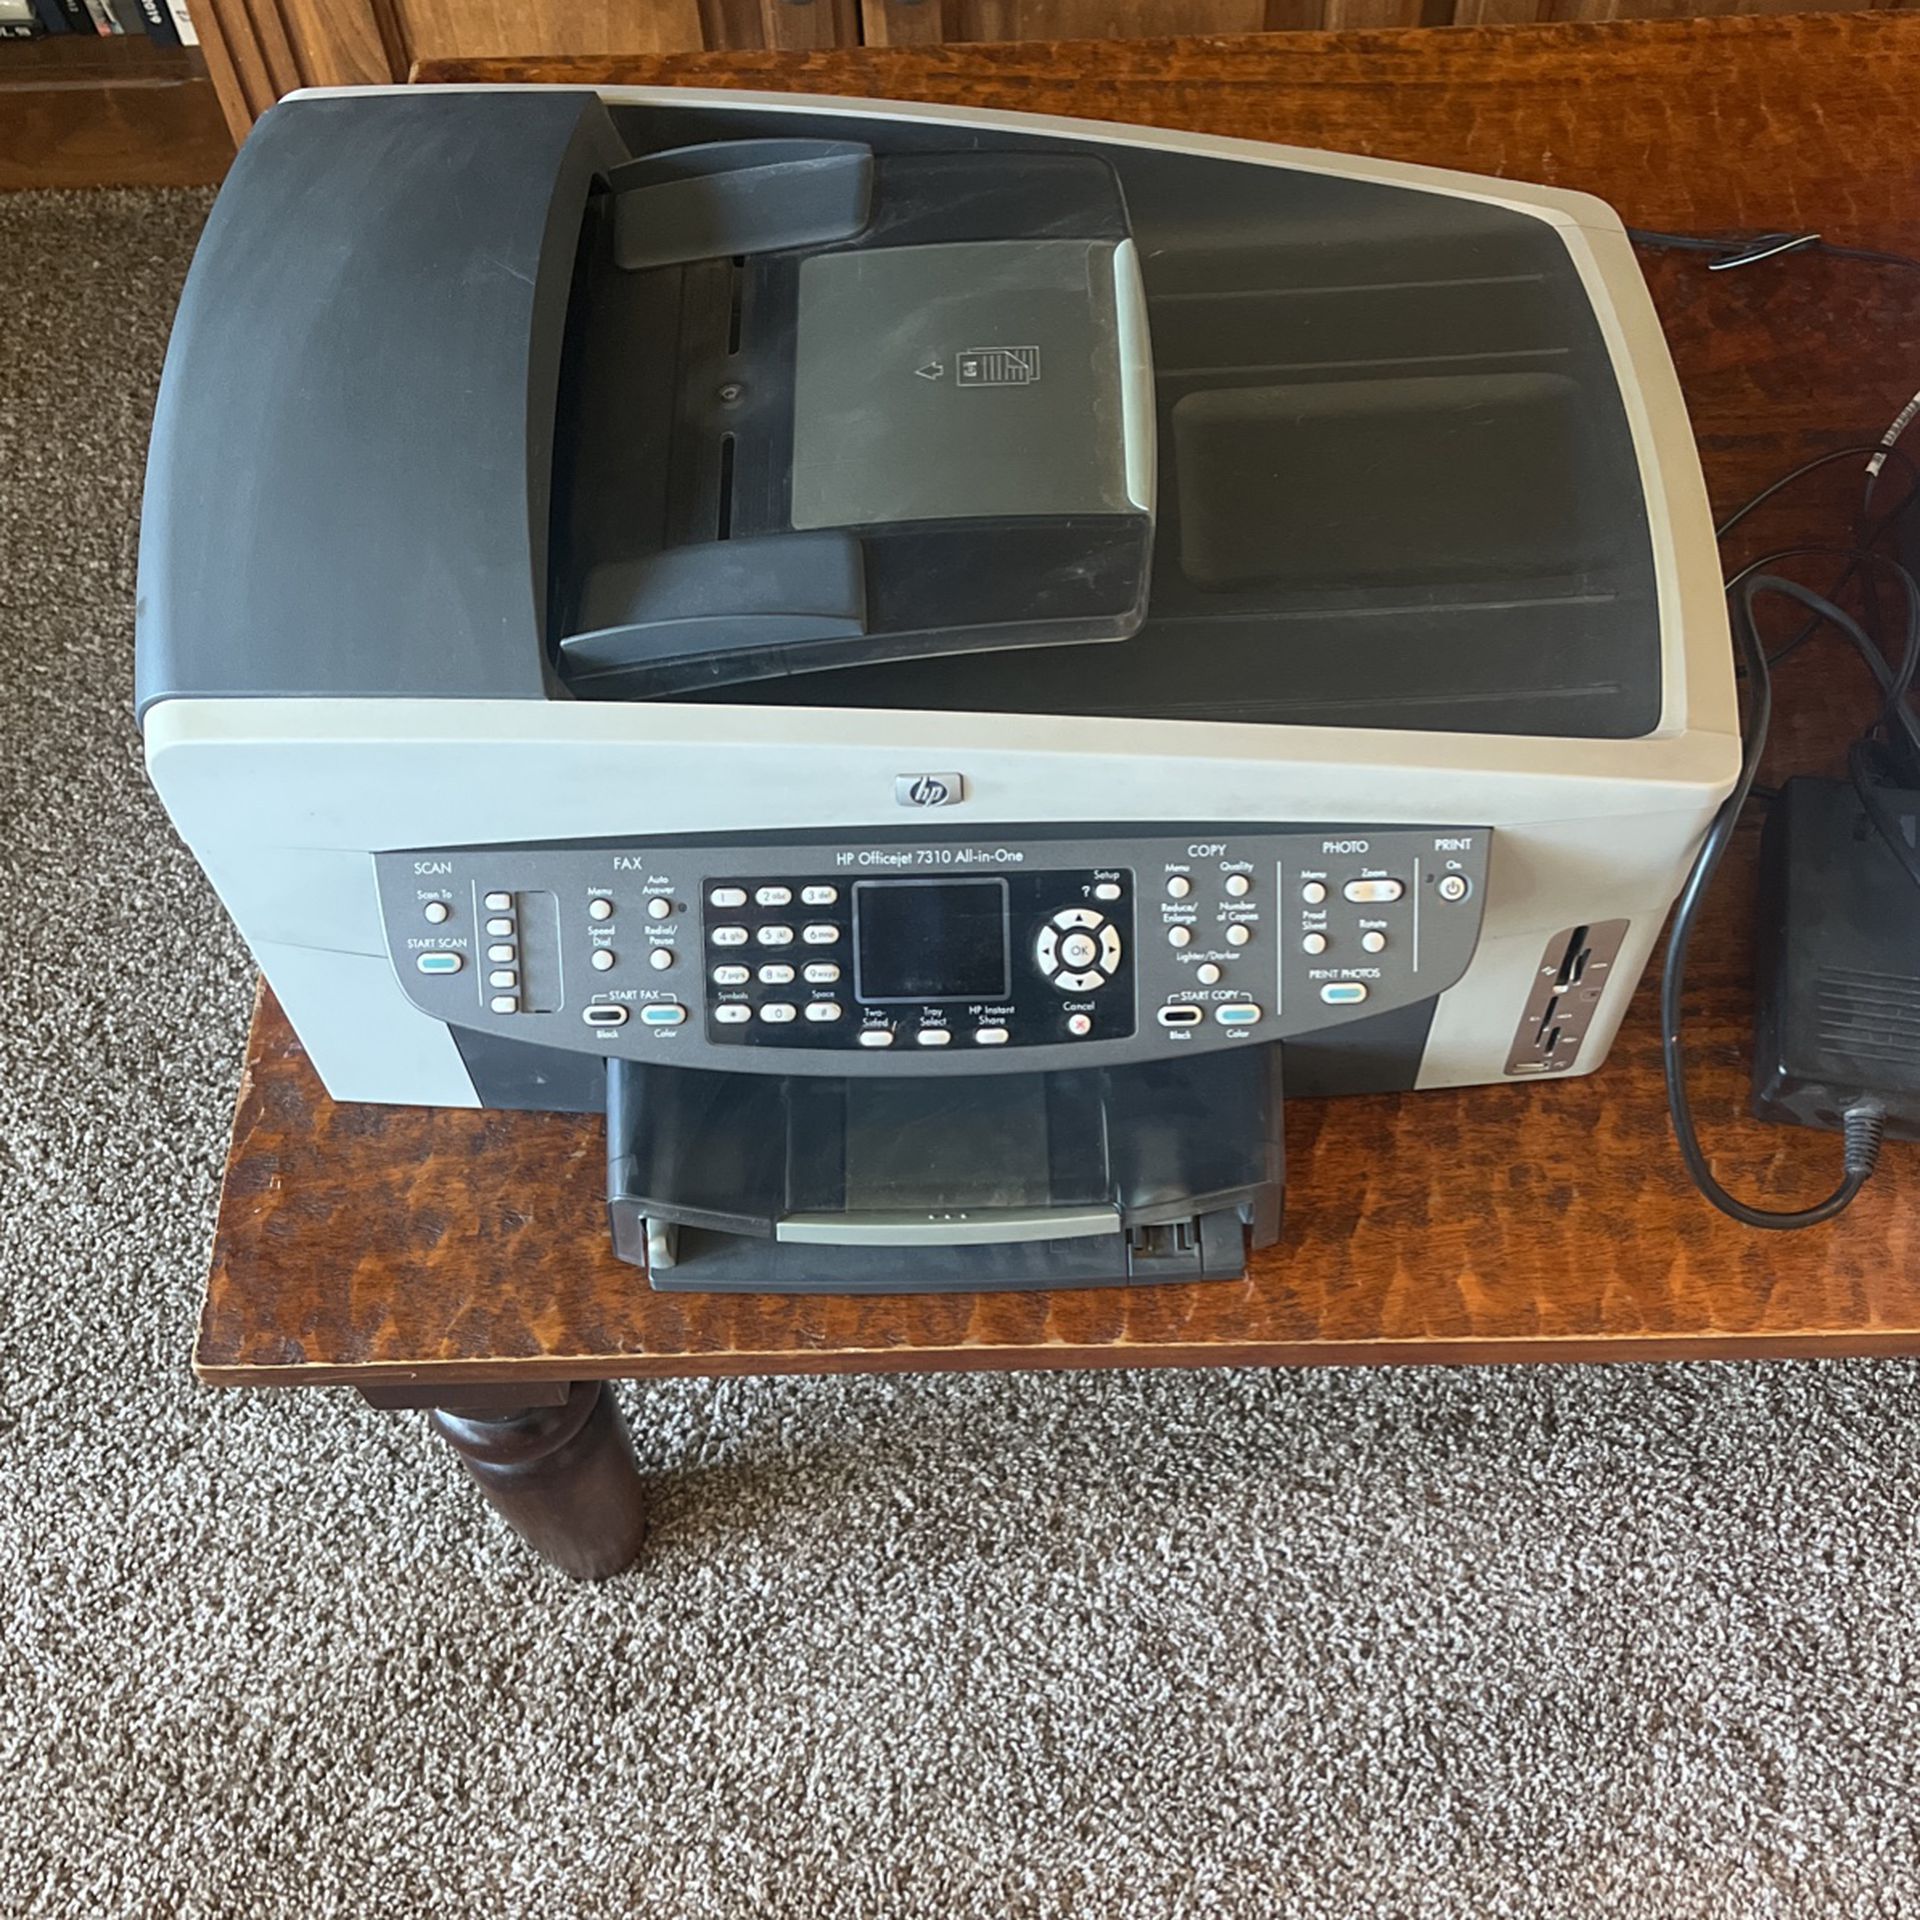 7310 all in for Sale in Tulare, CA - OfferUp